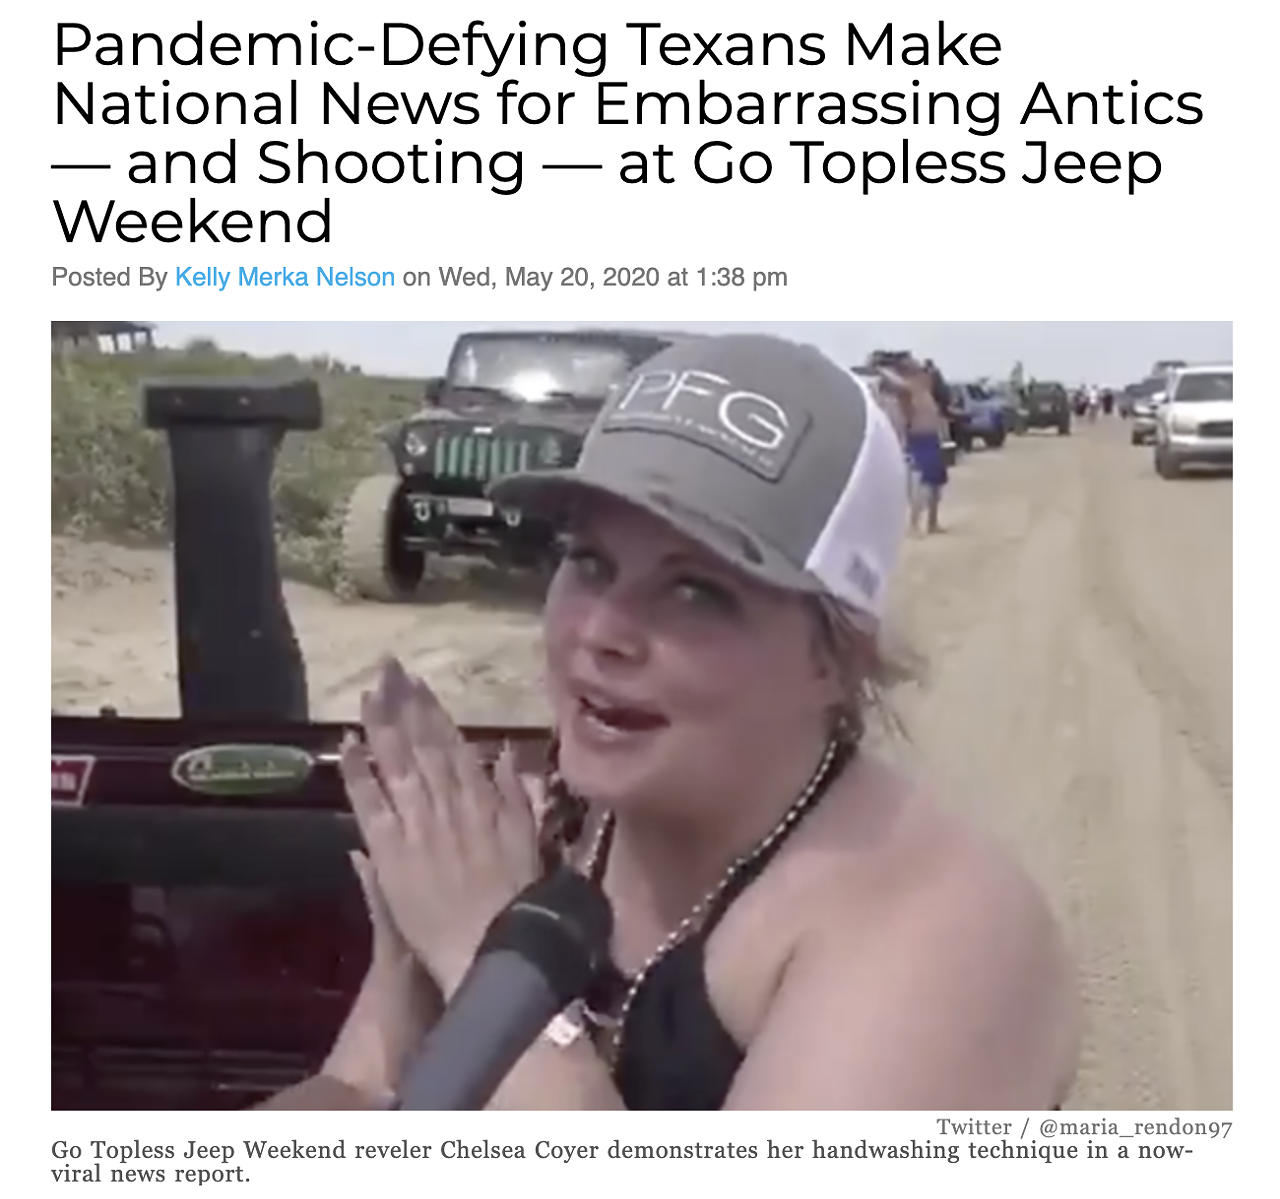 Despite the ongoing global pandemic, crowds of partiers descended on Crystal Beach on Texas' Bolivar Peninsula for Go Topless Jeep Weekend, an event that's about as classy as it sounds. Read more here.